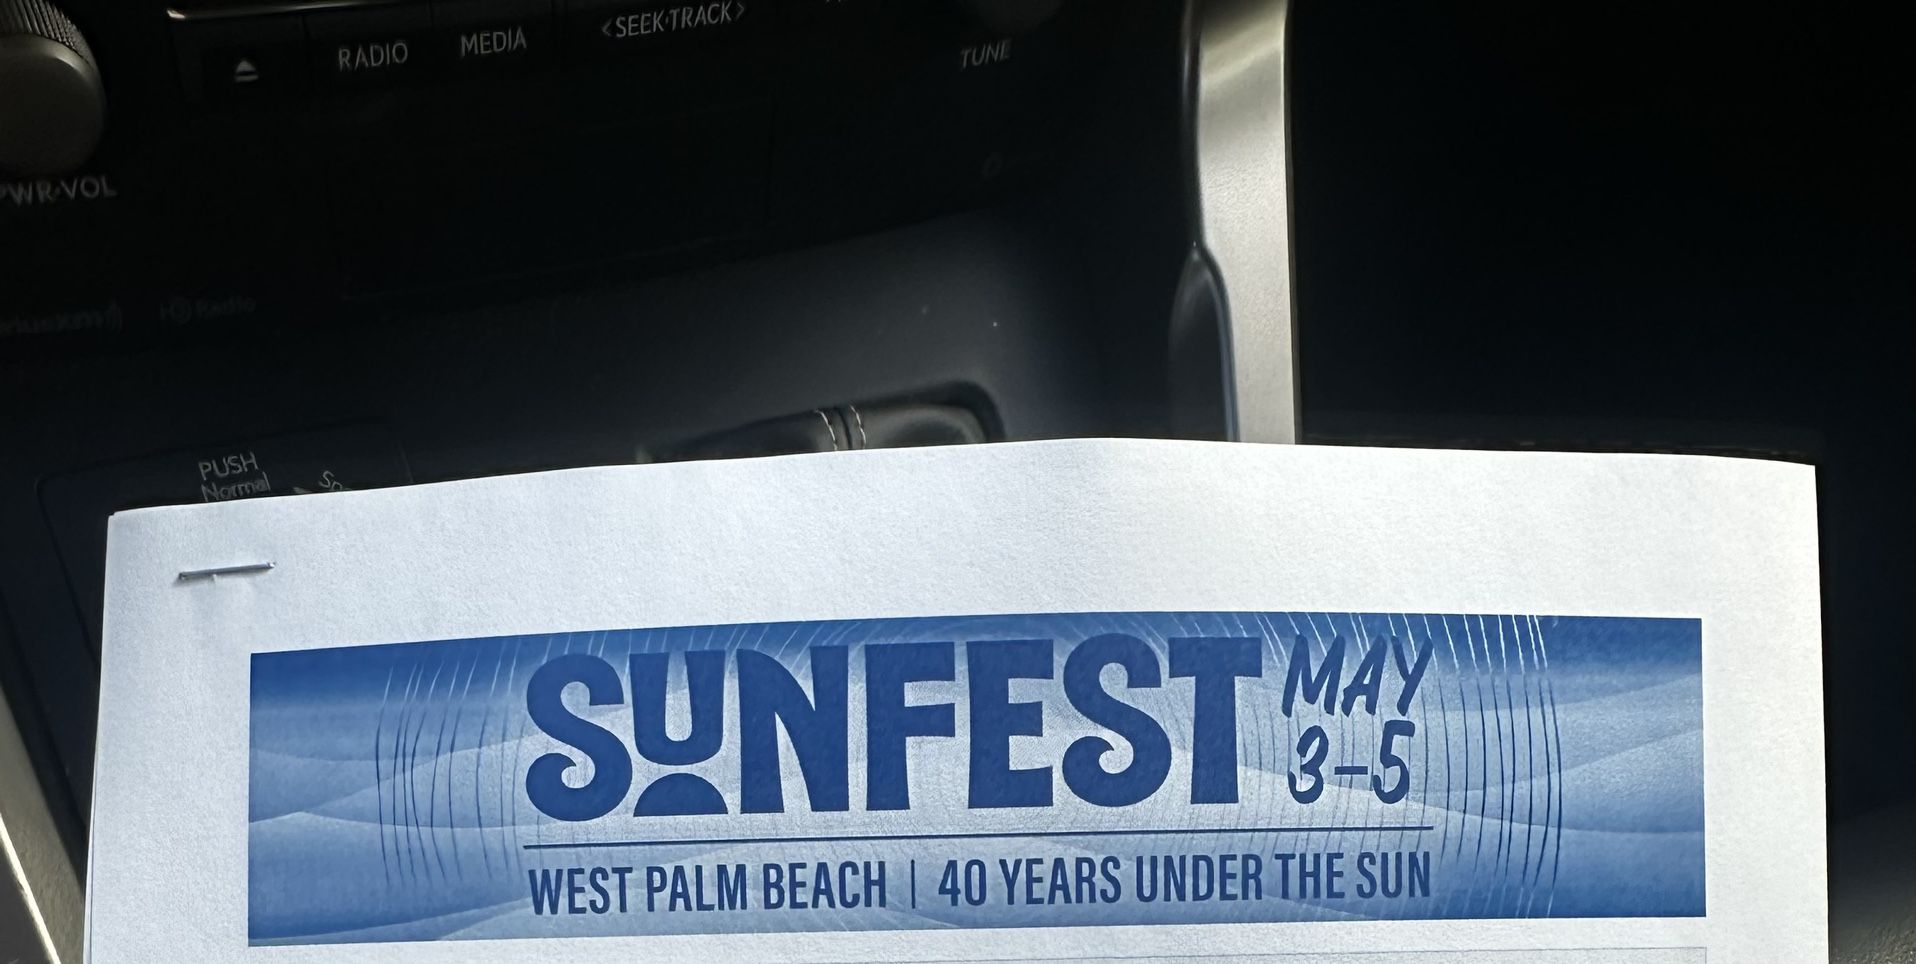 2 Tickets To SUNFEST ALL 3 Days